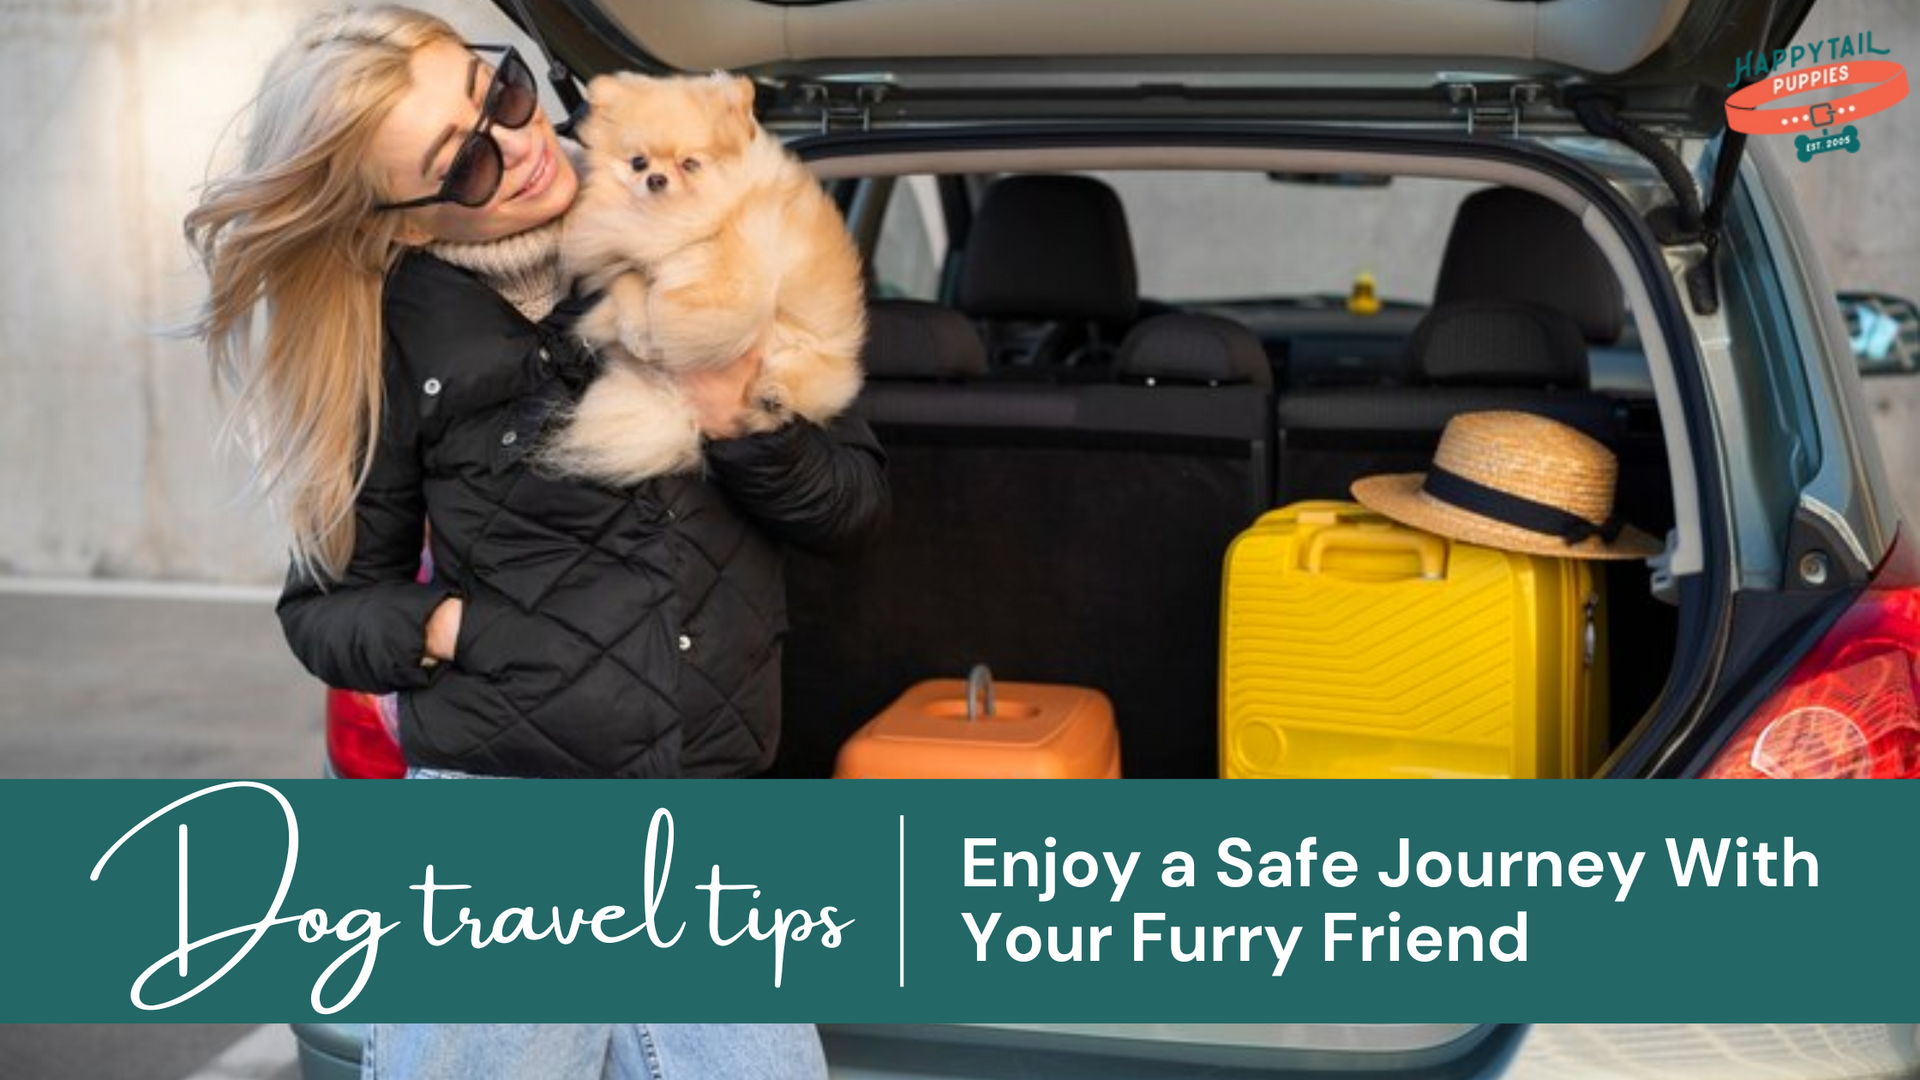 Dog Travel Tips: Have a Safe and Enjoyable Journey with Your Furry Friend